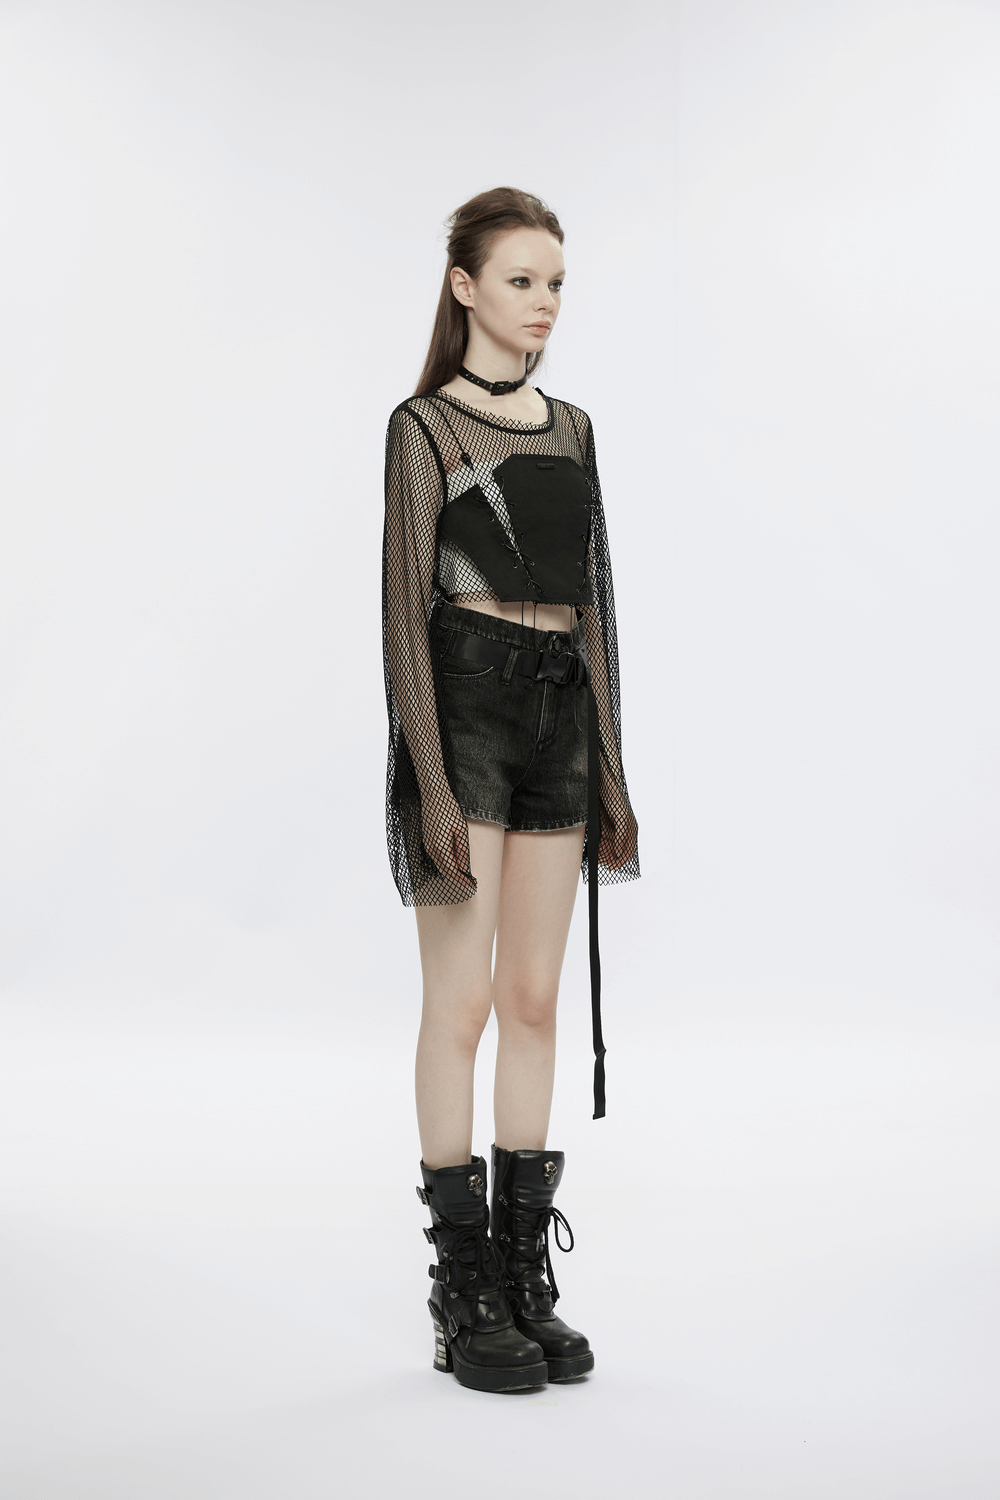 Gothic Mesh Sleeve Top with Punk Lacing Accents